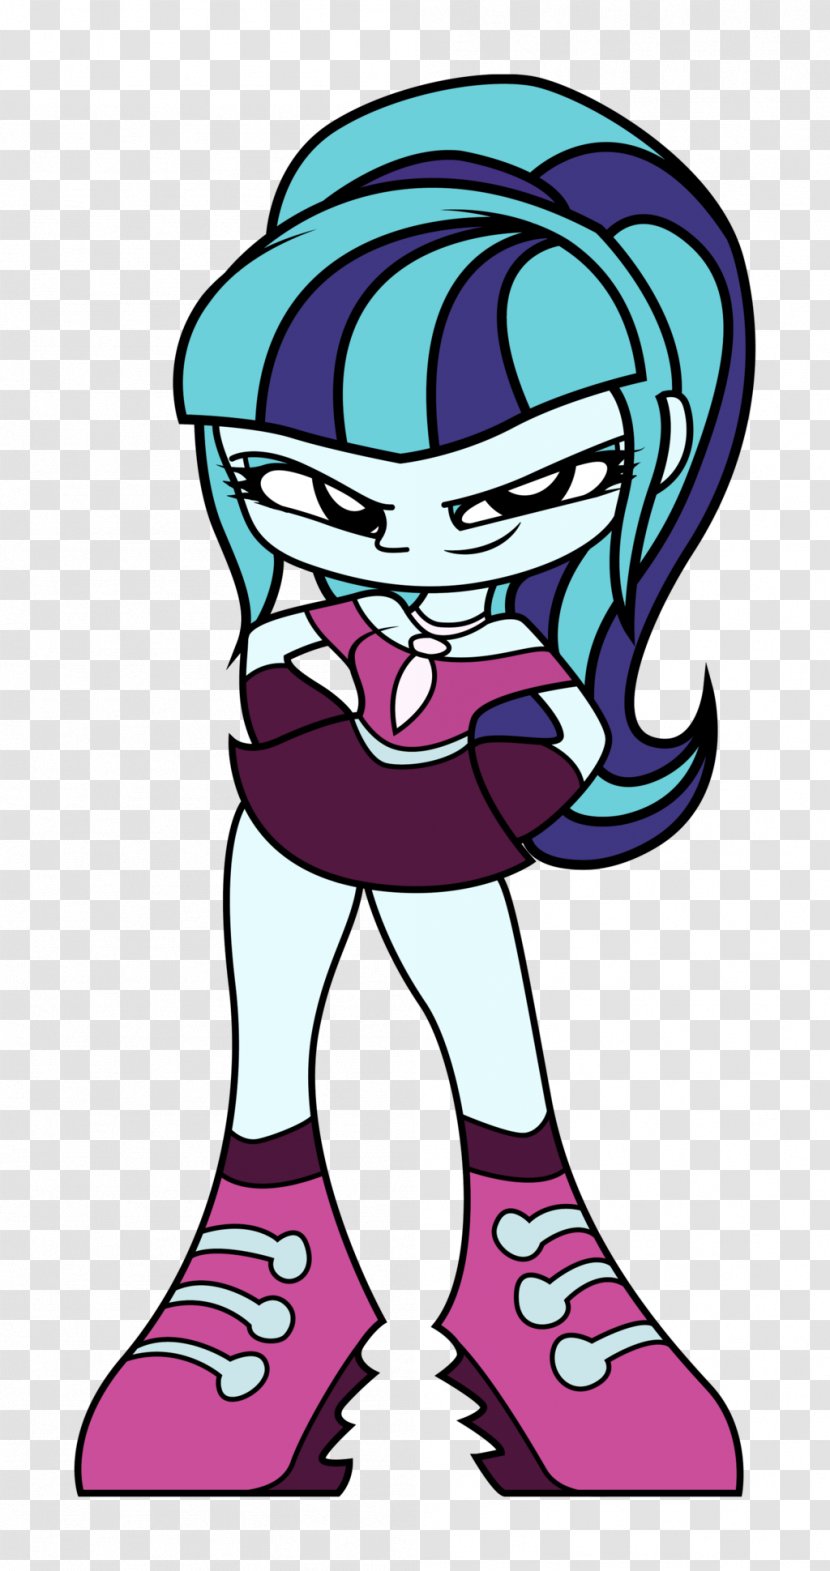 YouTube DeviantArt Under Our Spell - My Little Pony Equestria Girls Legend Of Everfree - Youtube Transparent PNG